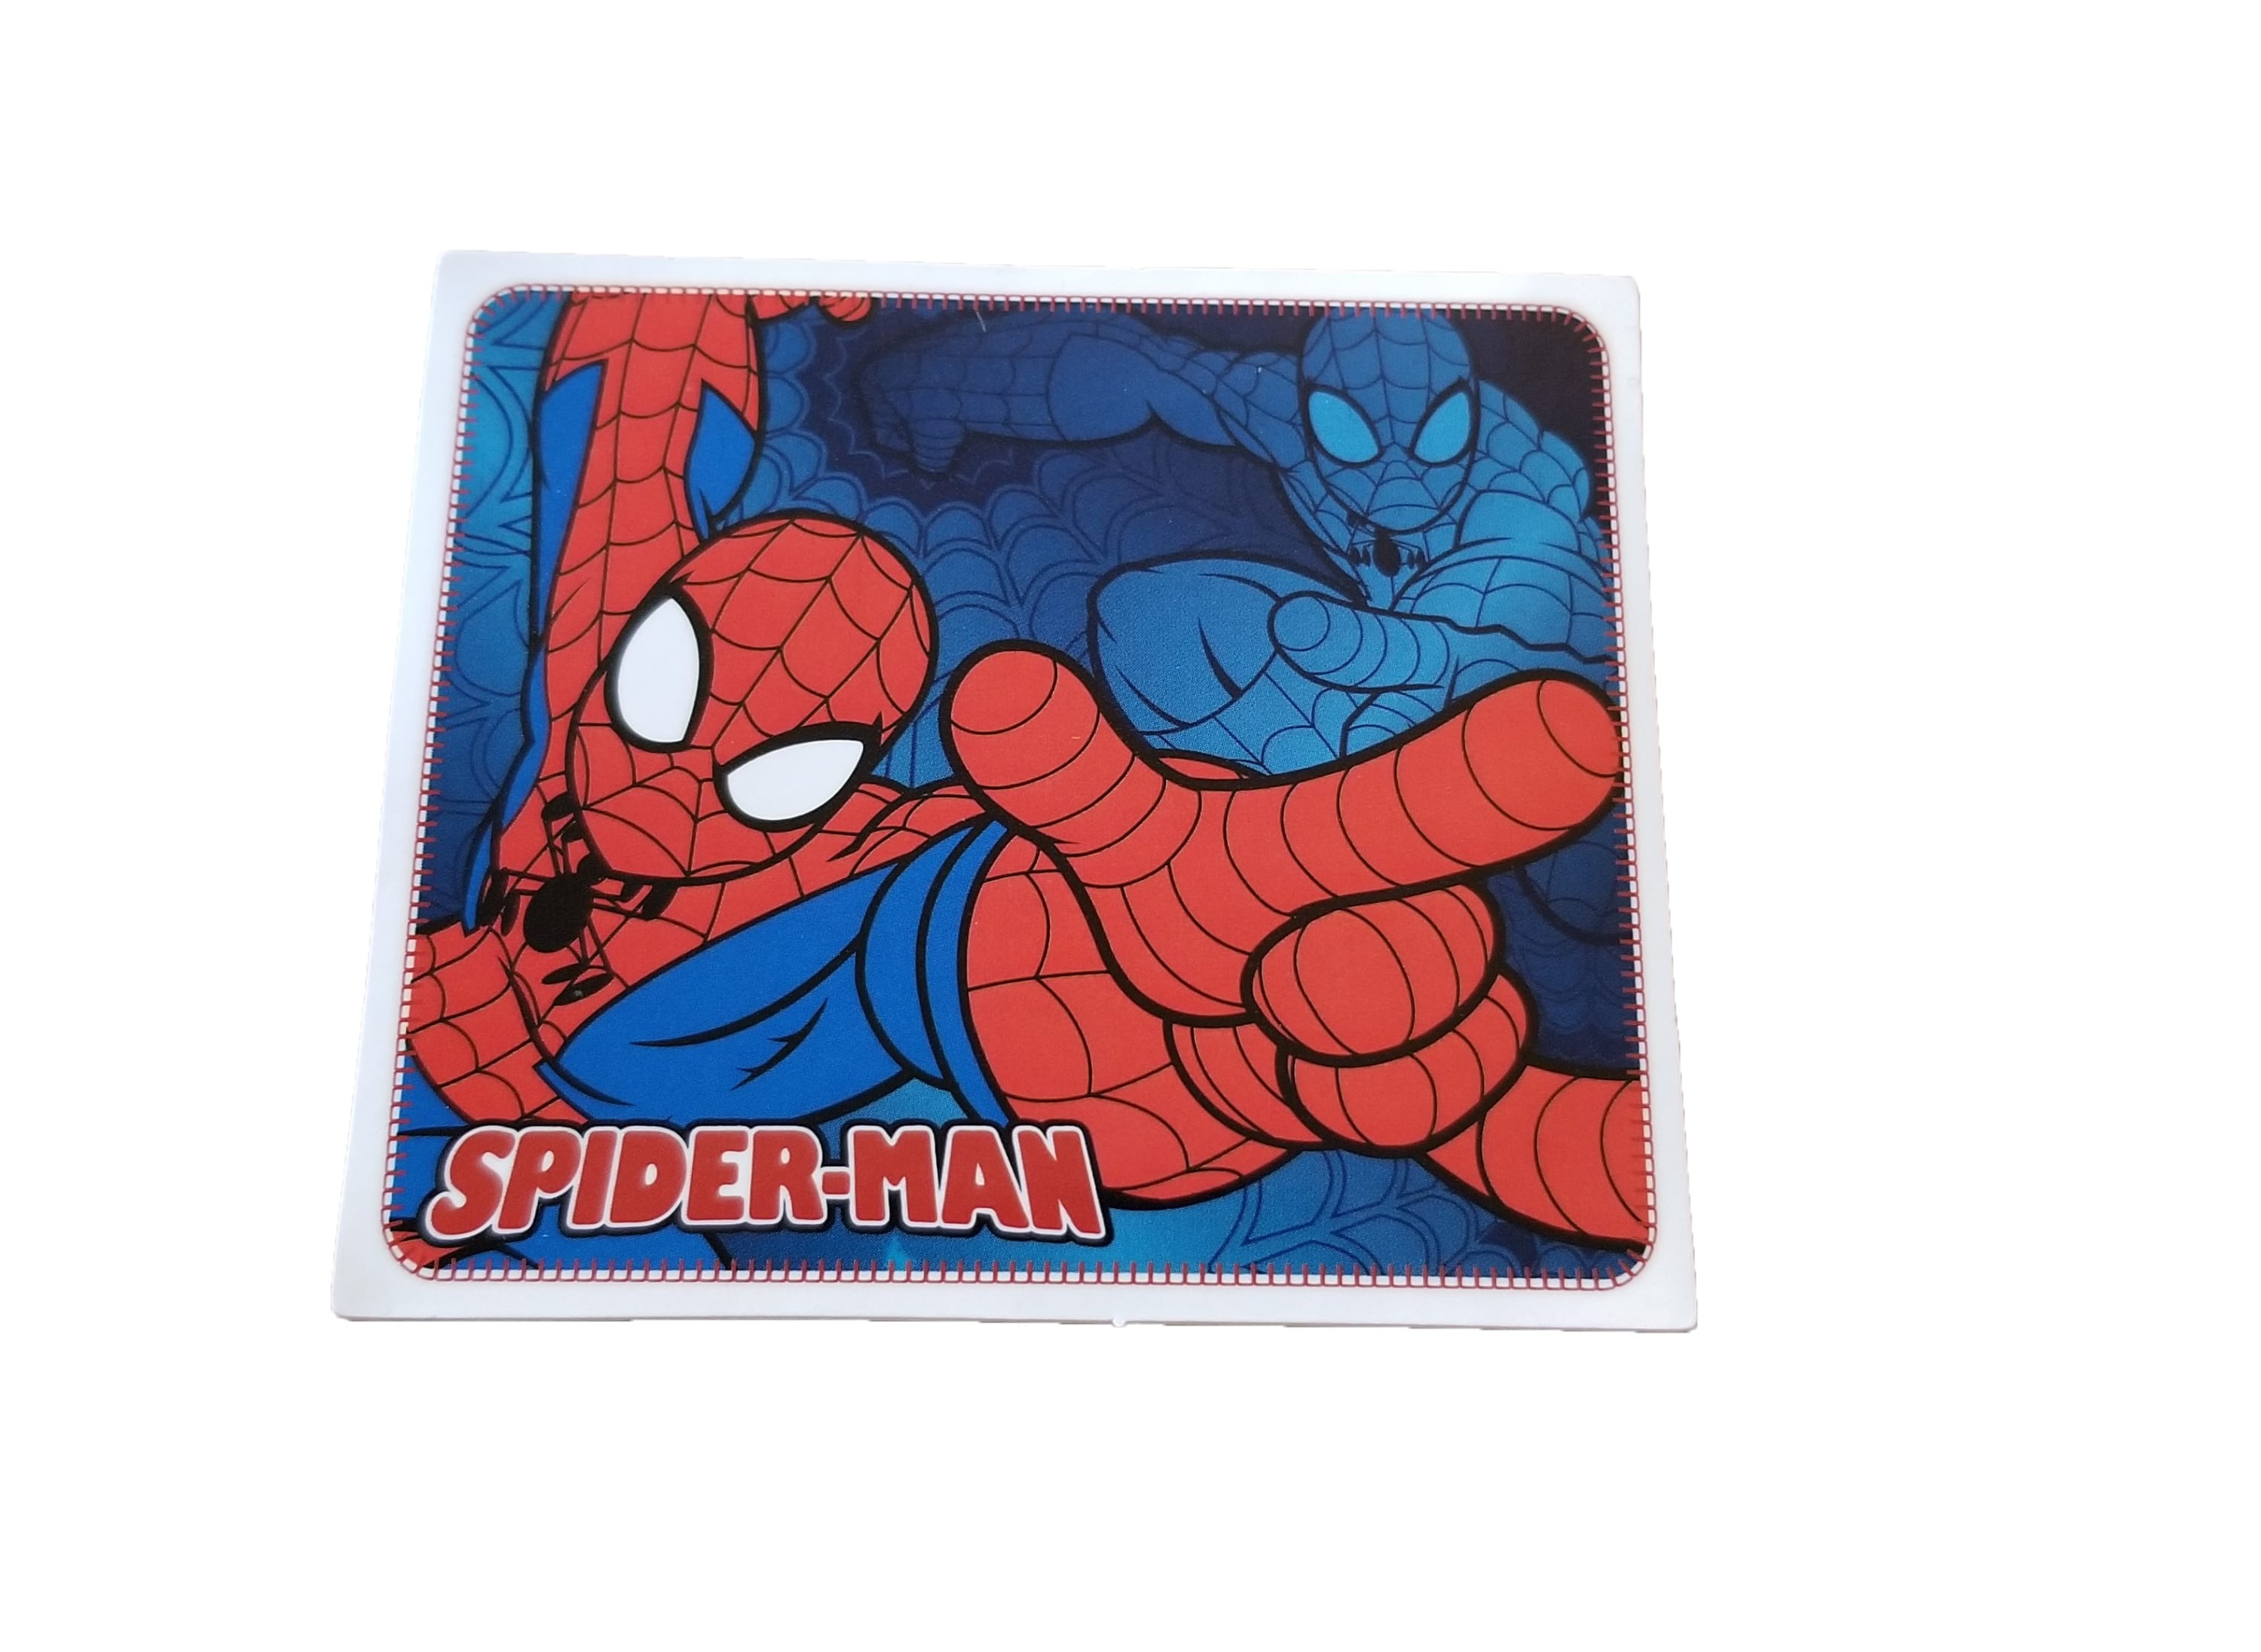 Rectangular Spiderman sticker with Spiderman aiming his shooting hand, blue background also has Spiderman blended into it with Spidey aiming in different position